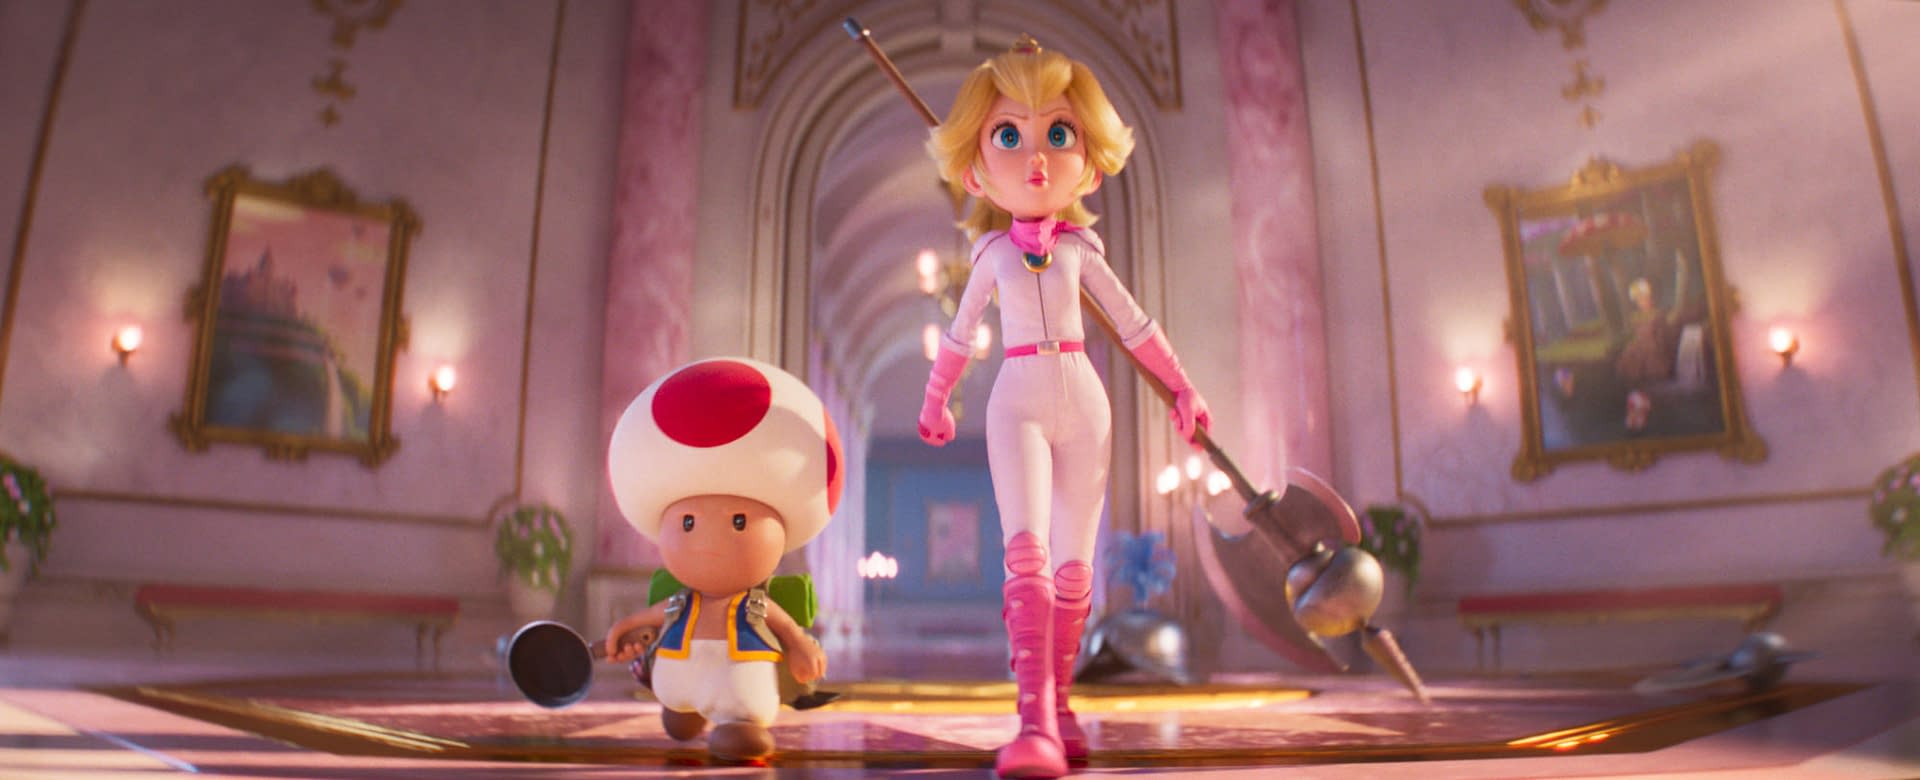 The Super Mario Bros. Movie New Trailer and Images Are Released